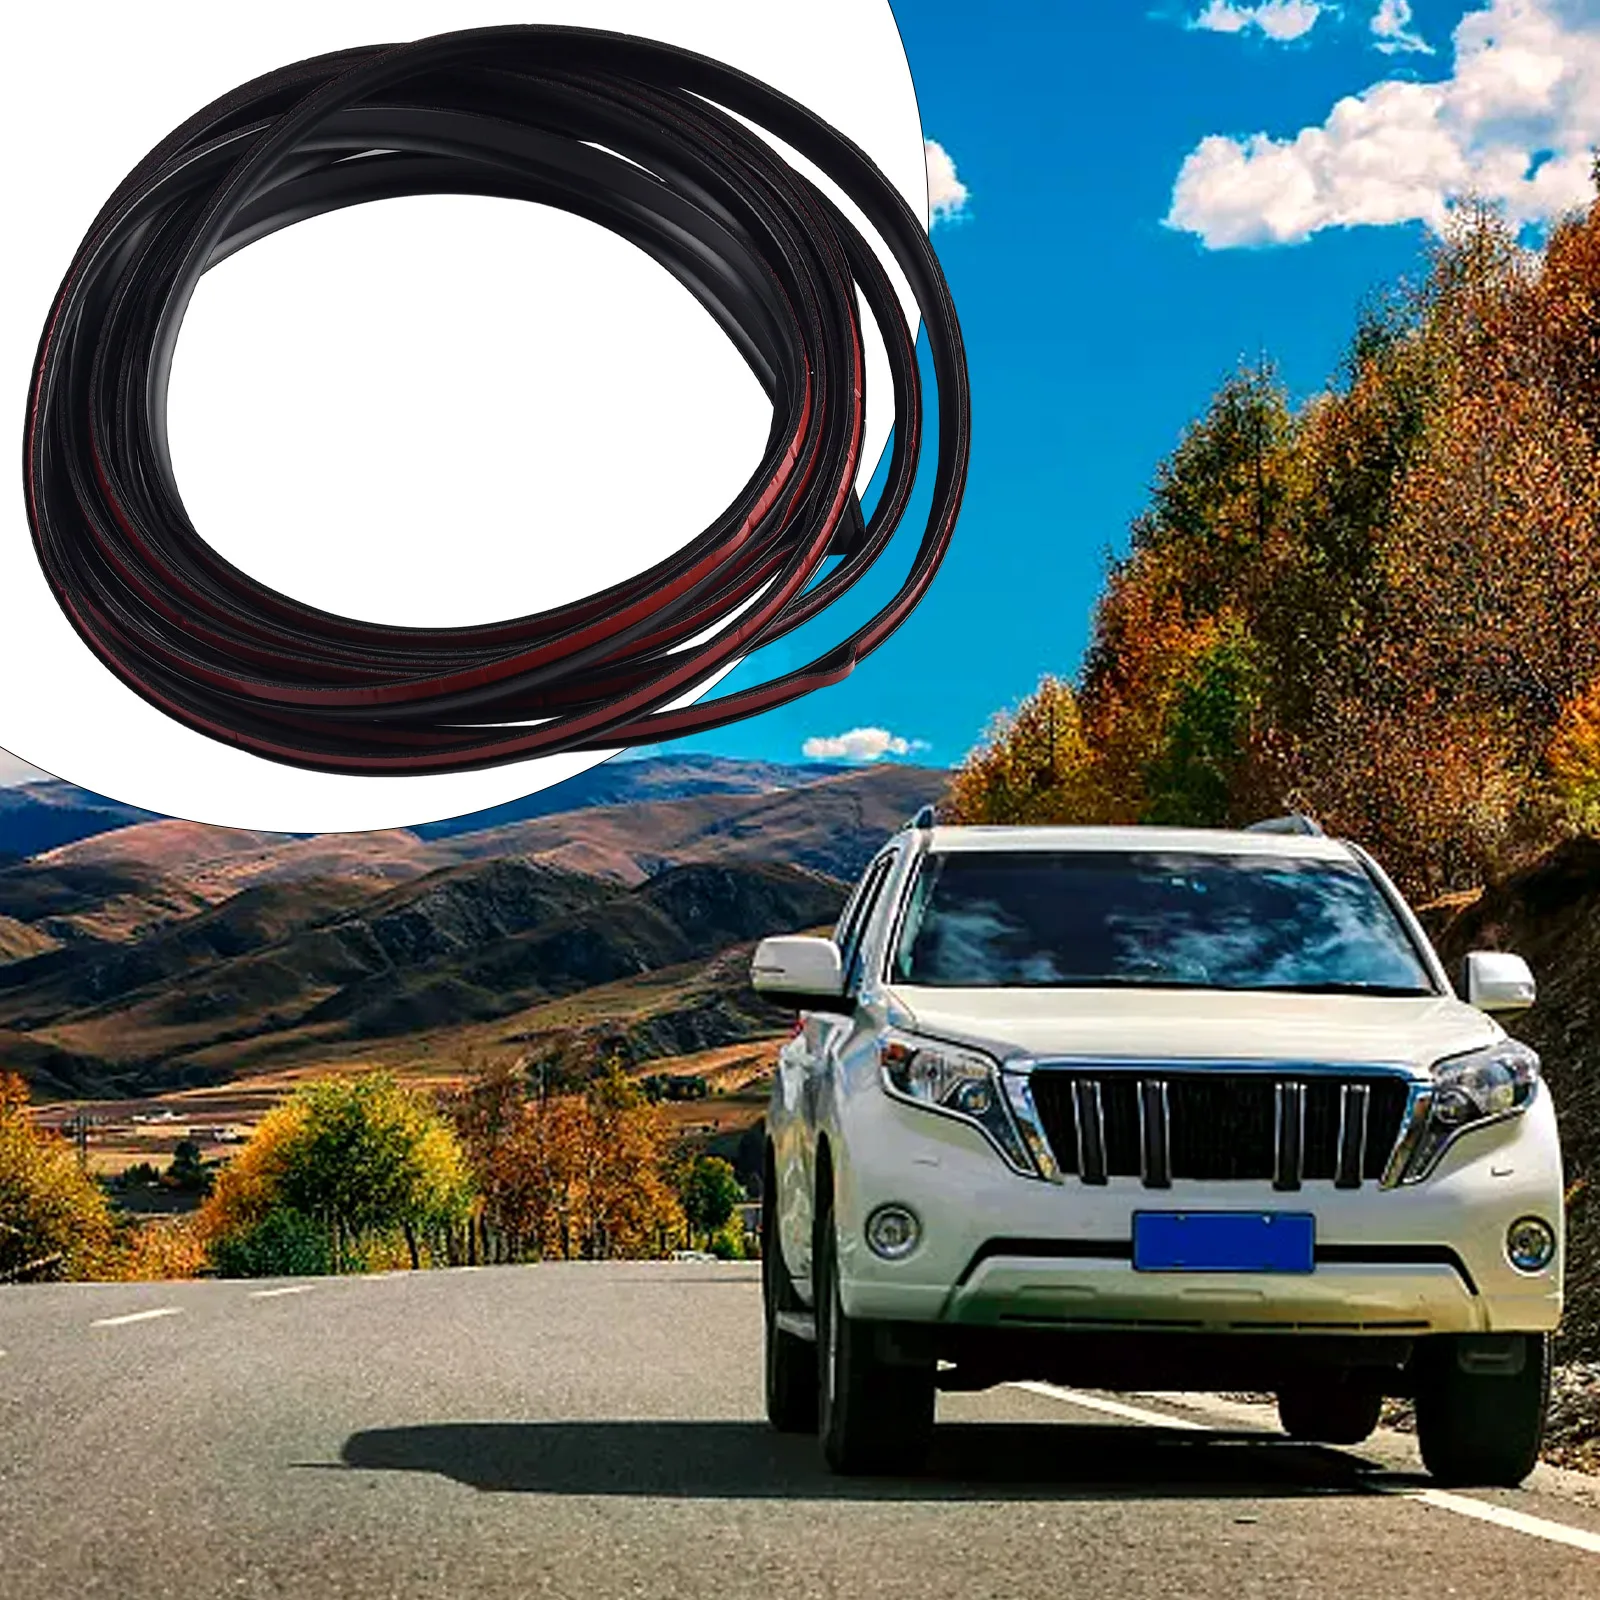 

4M Car Sealing Strip Inclined T-shaped Weatherproof Edge Trim Rubber Universal Optimizing Cooling Airflow Automotive Seals